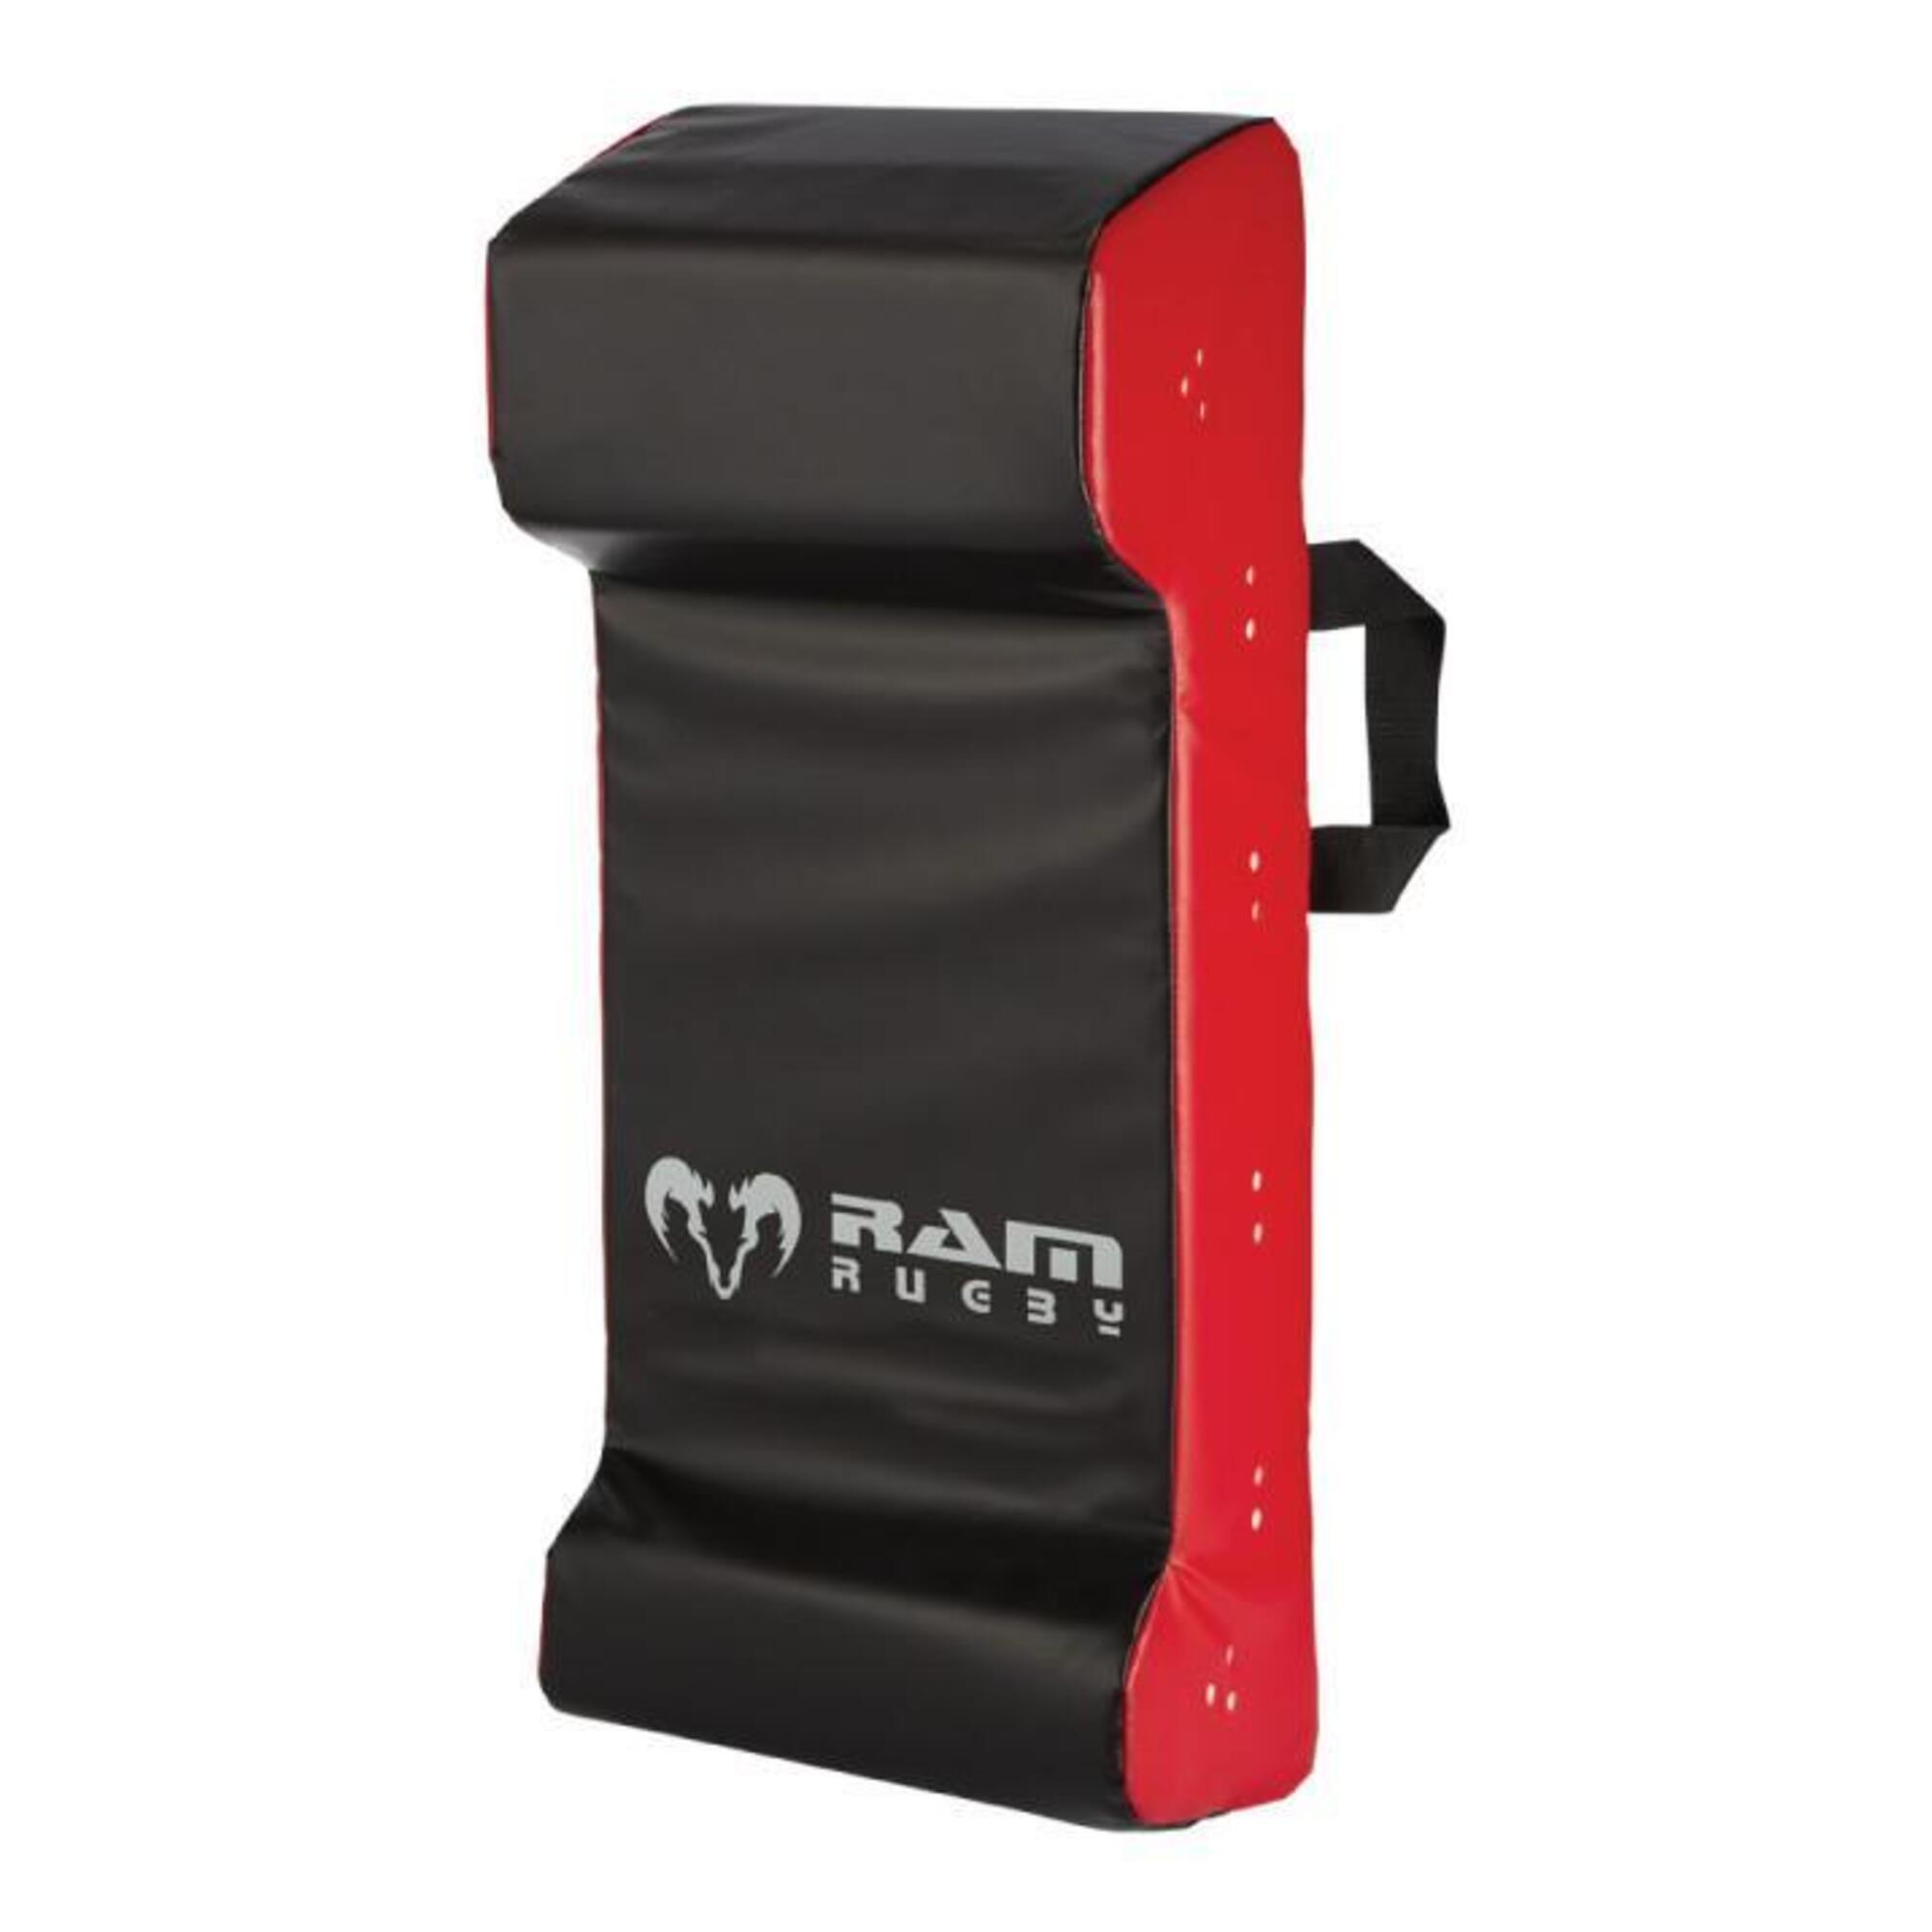 Ram Rugby - Double Wedge Hit Shield - Large 2/3